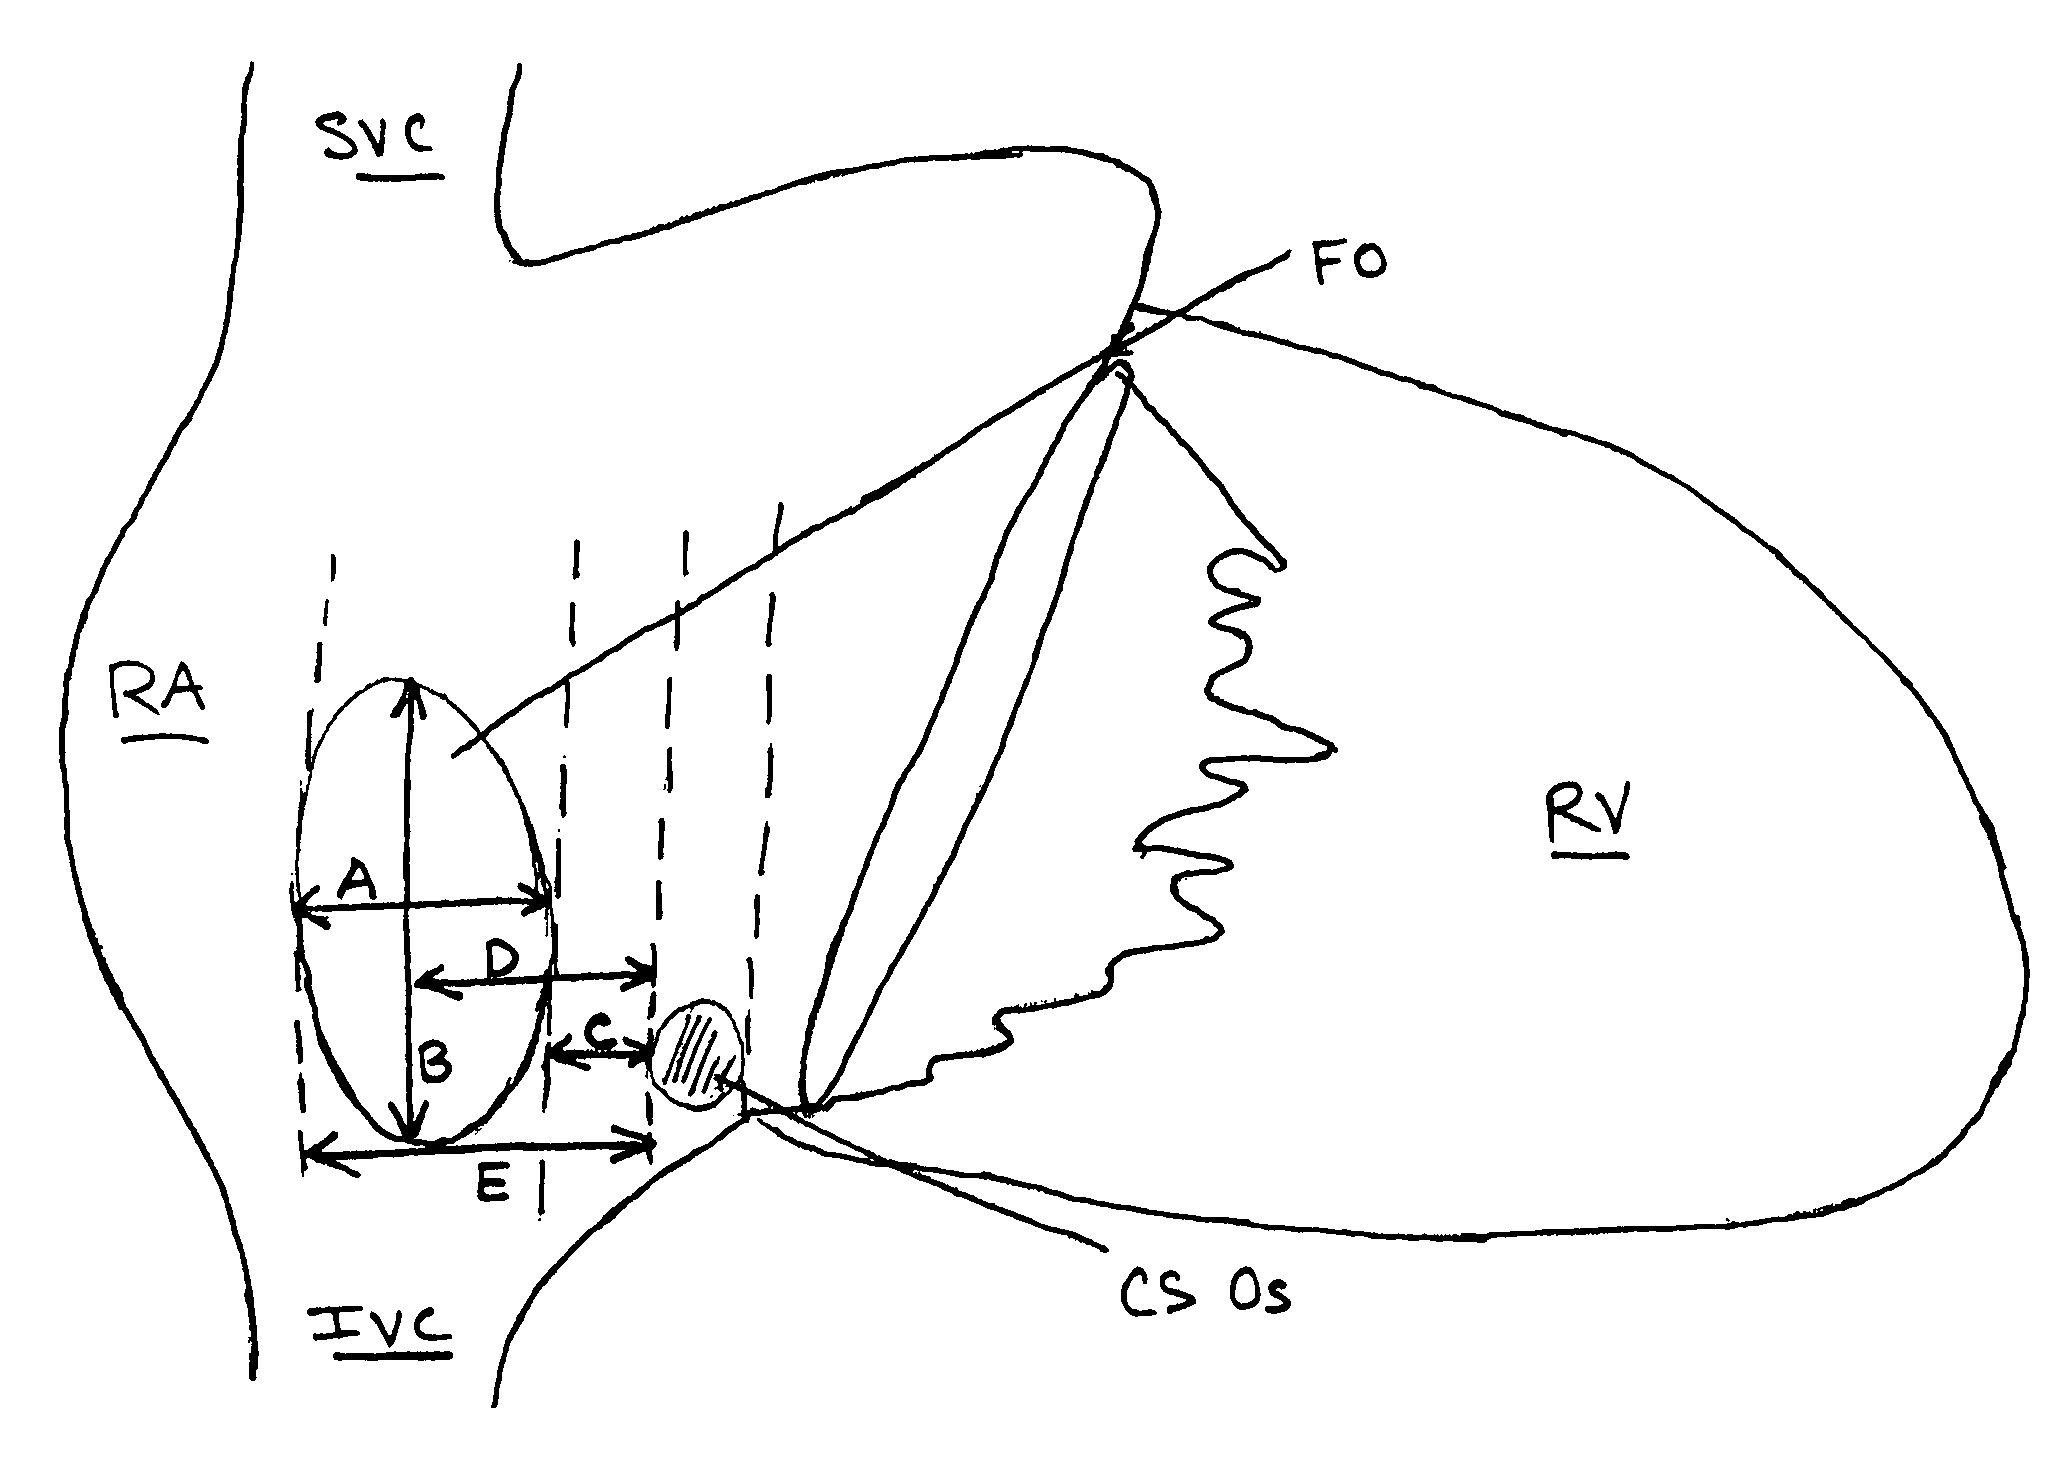 Method and apparatus for locating the fossa ovalis, creating a virtual fossa ovalis and performing transseptal puncture